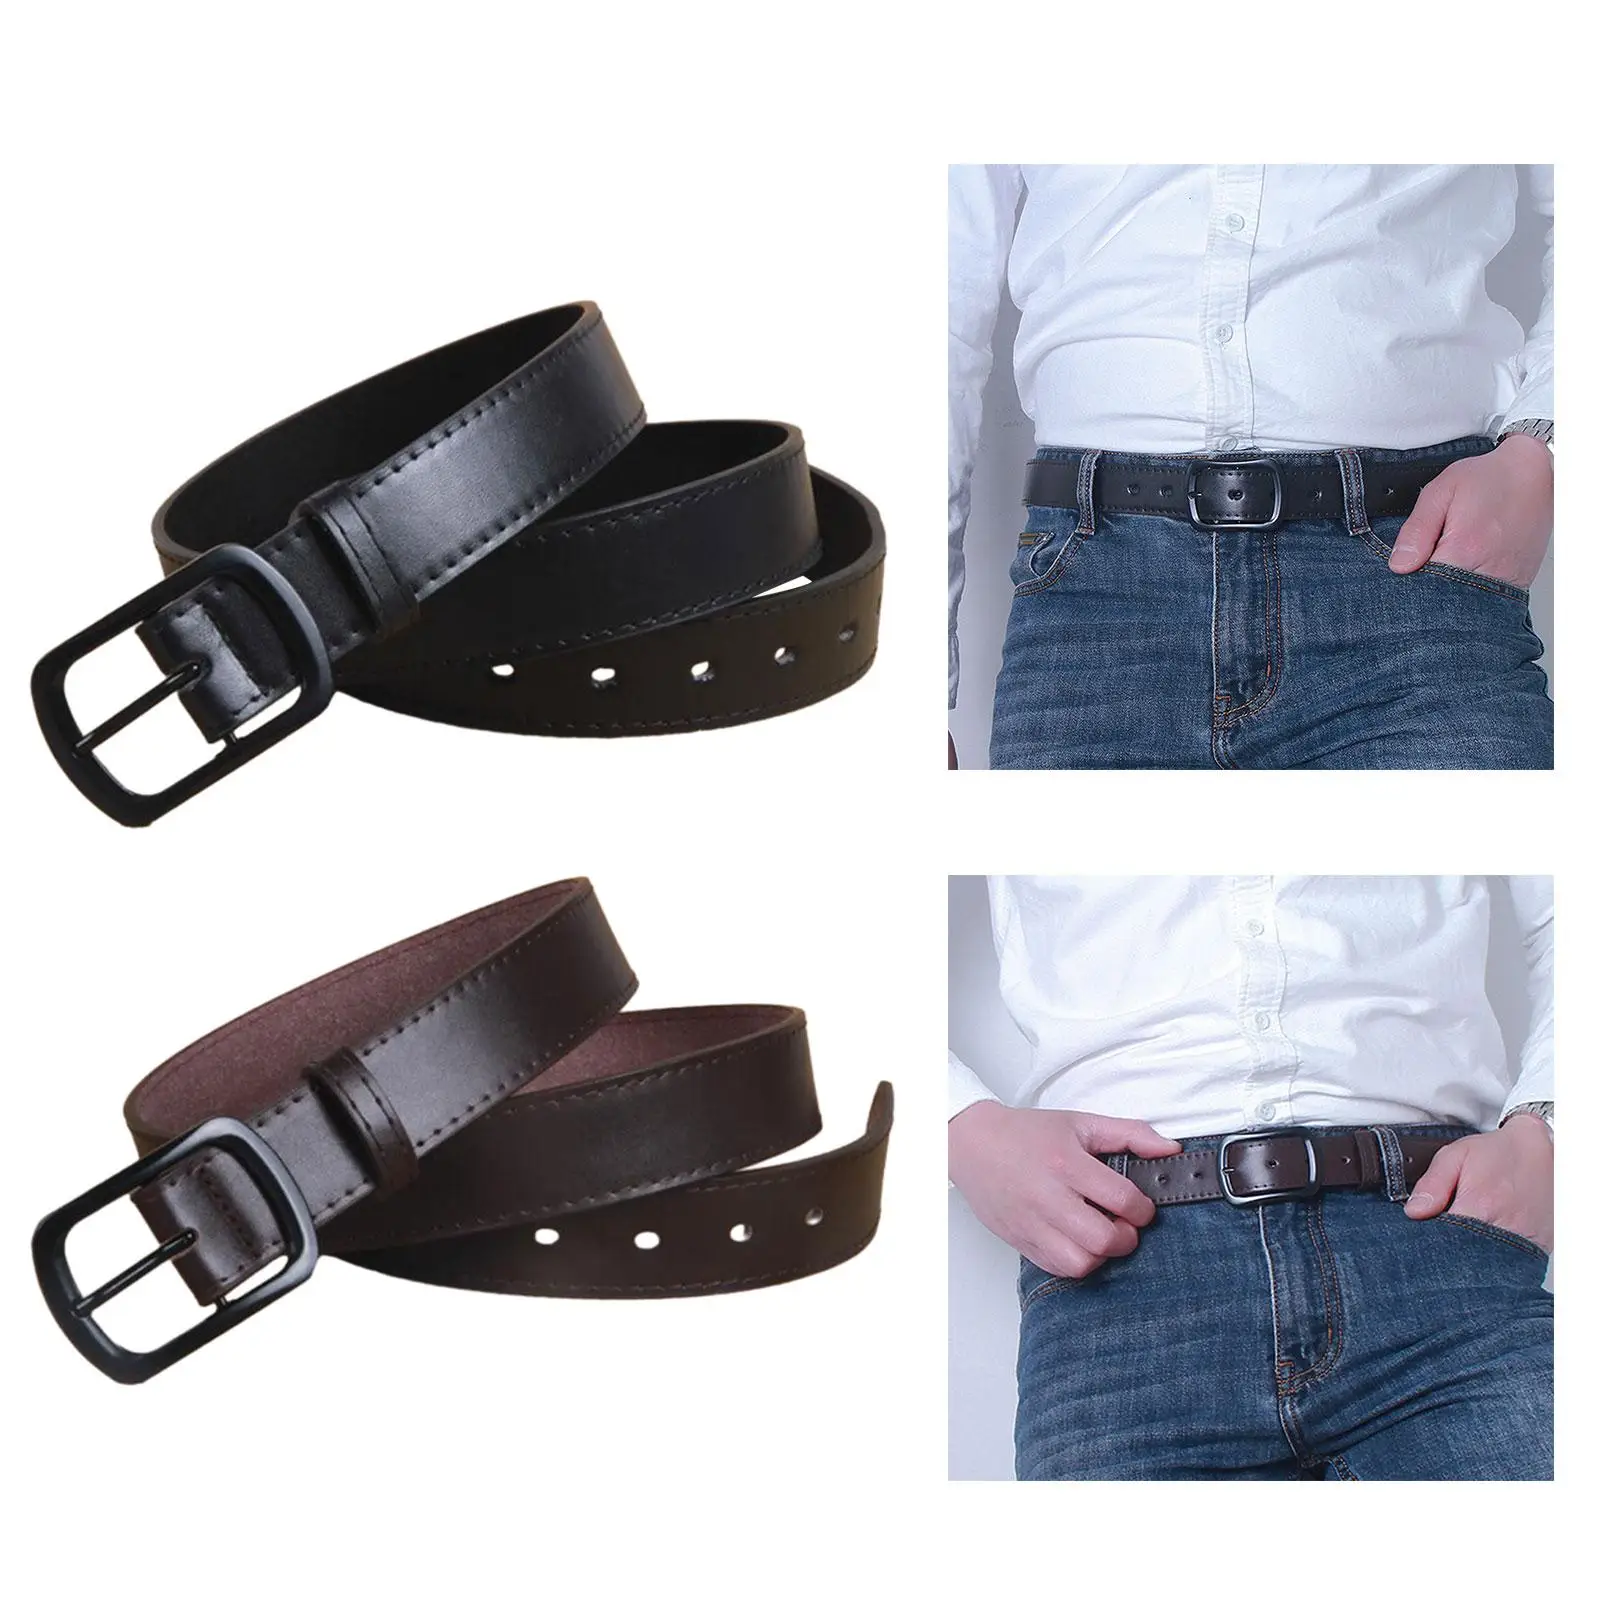 Men Dress Belt 120cm Long Classic Pin Buckle Decorative Adjustable Waistband for suits Party Work Jeans Accessories Business